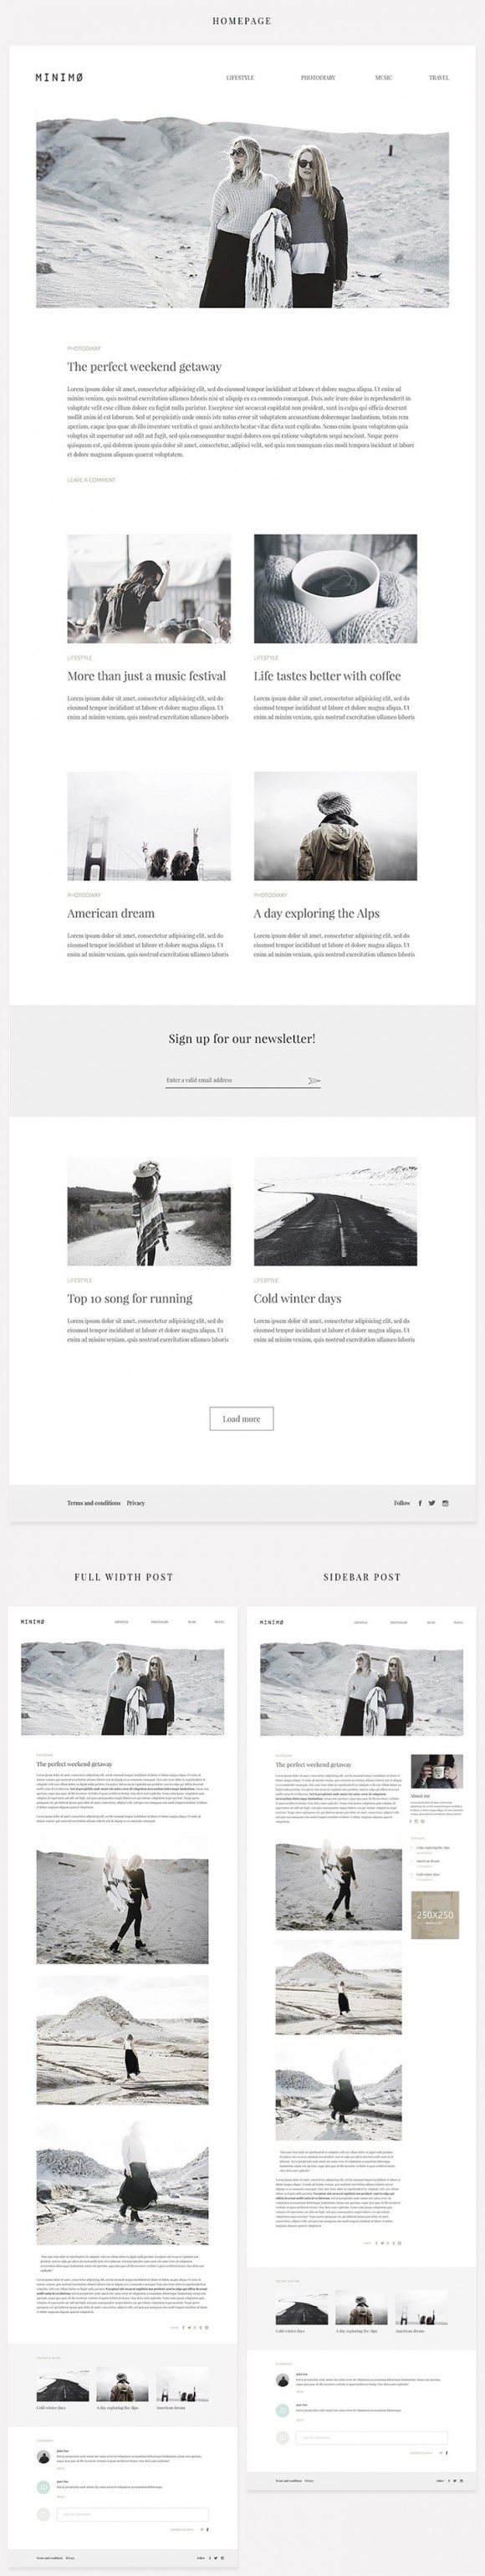 Minimo: Free PSD blog template (Full view)